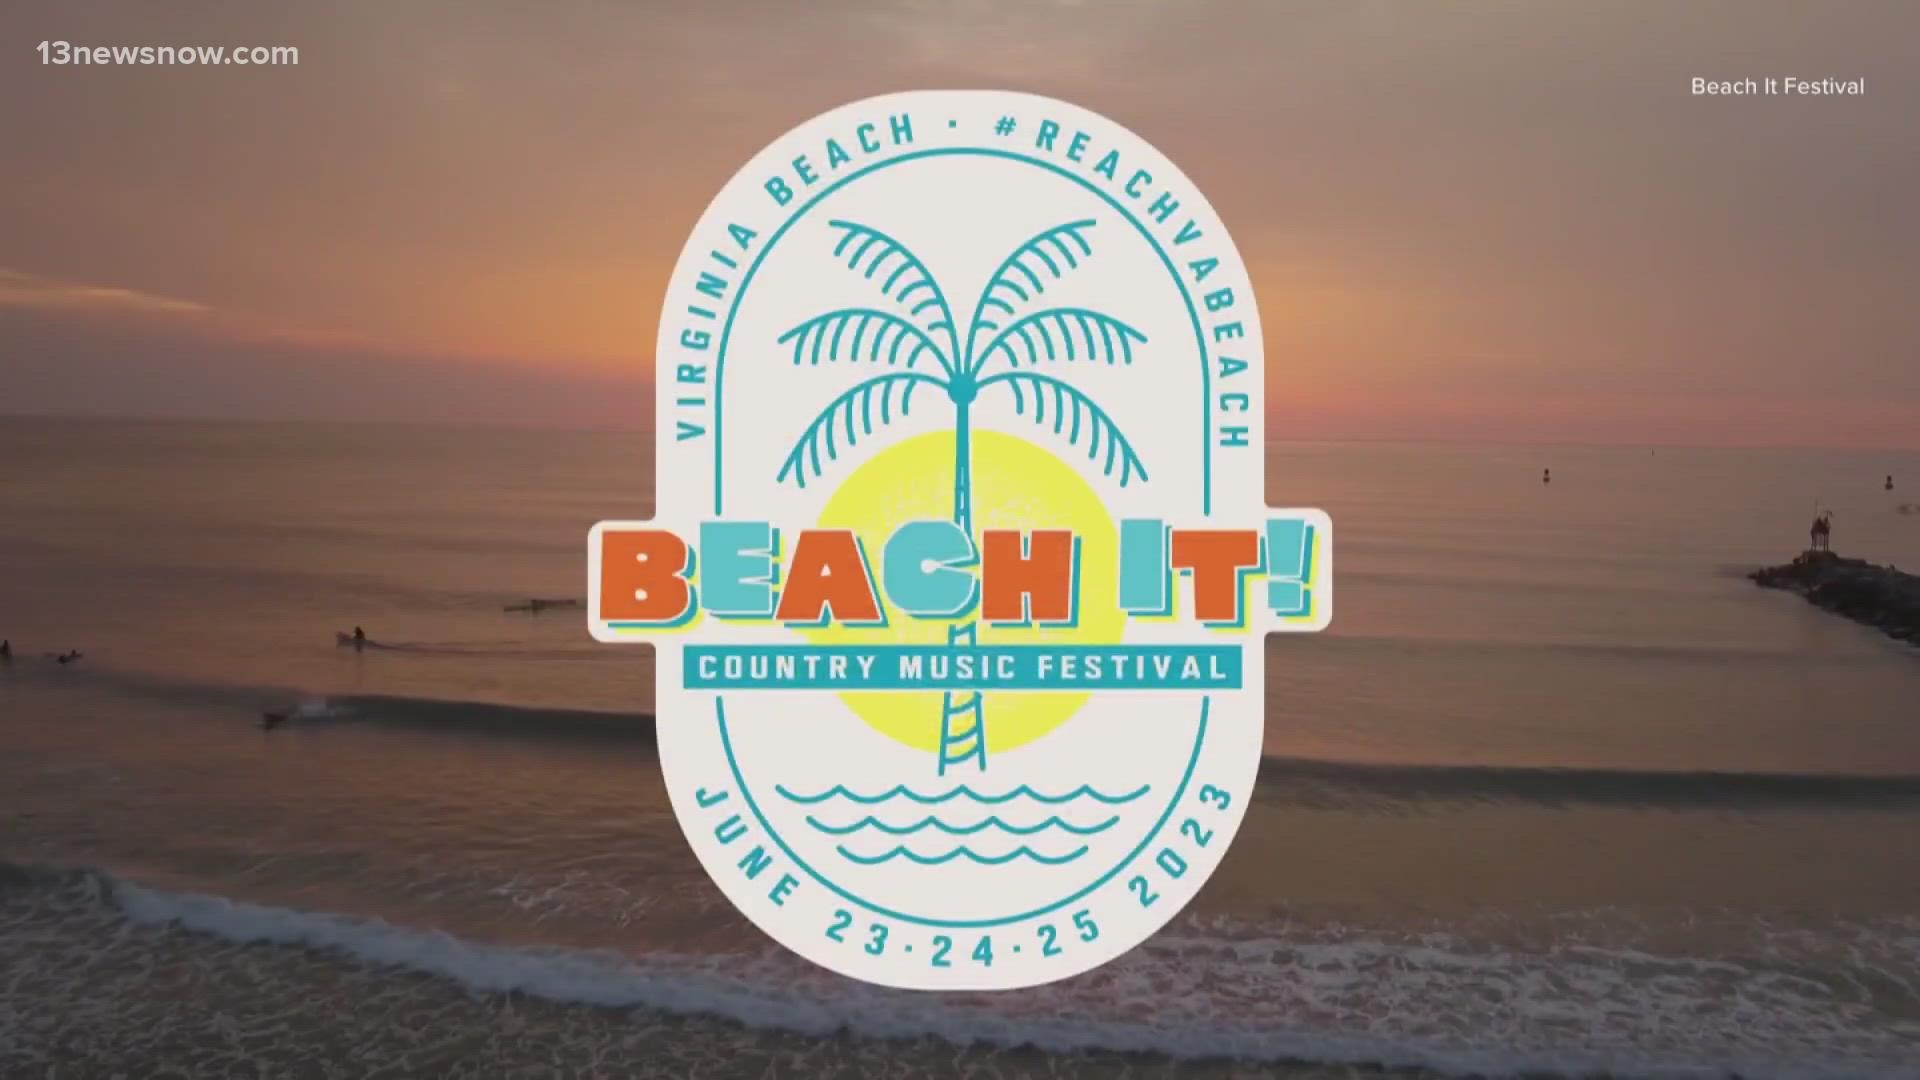 With "Beach It!" coming on the heels of "Something in the Water," what does that mean financially for the city?